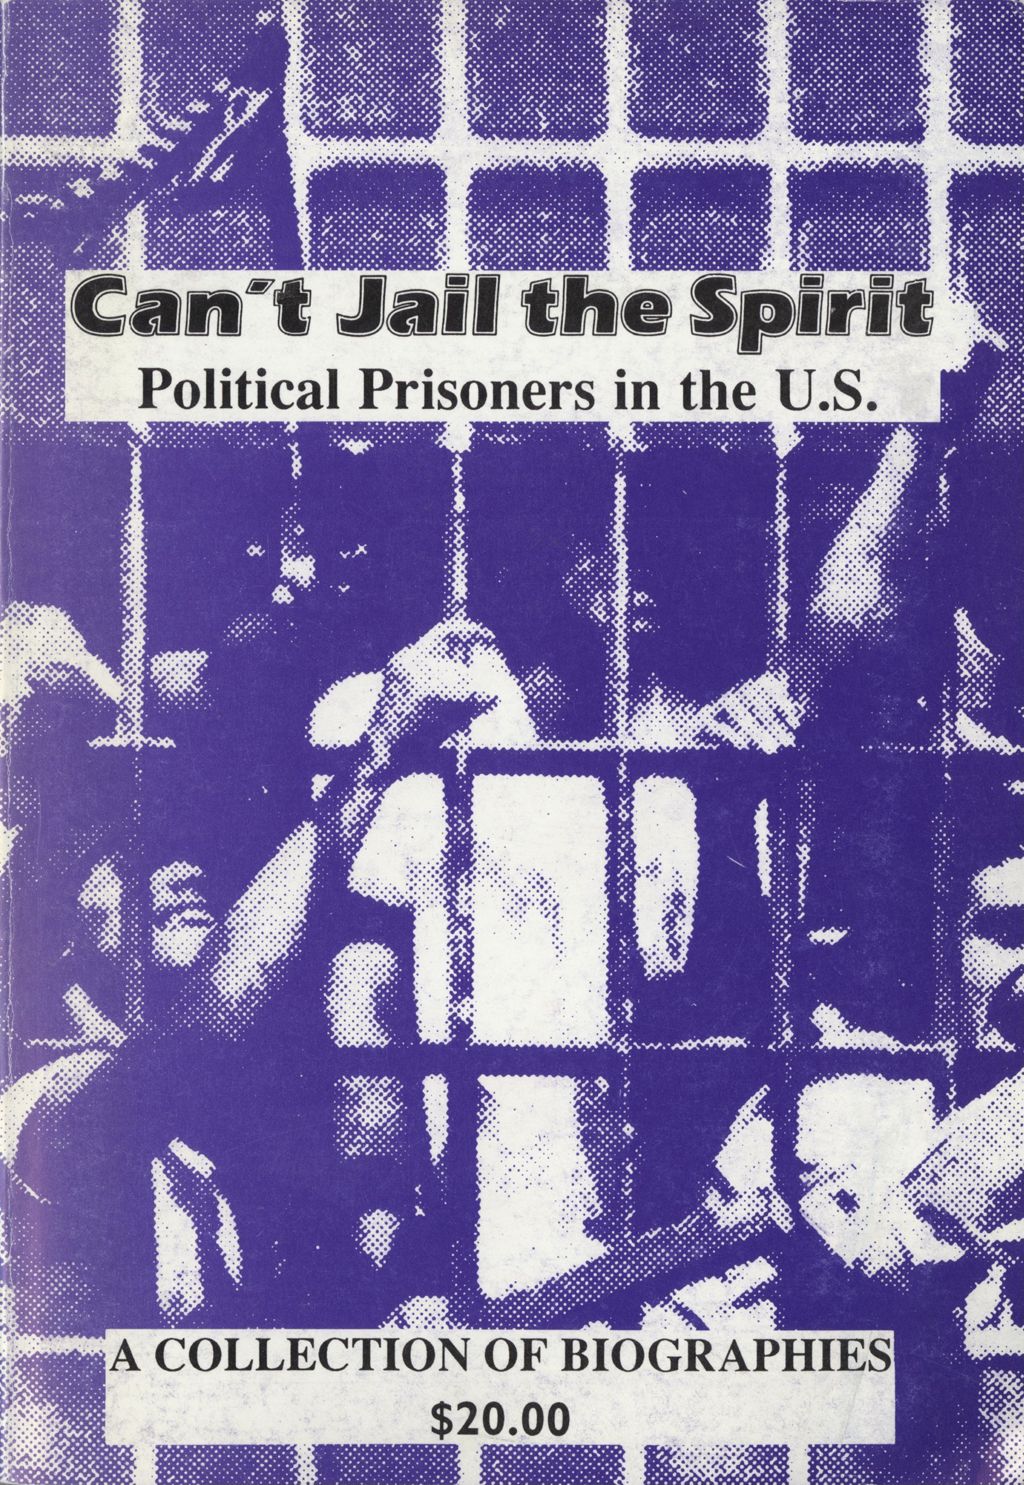 Can't Jail the Spirit: Political Prisoners in the U.S. (selected pages)